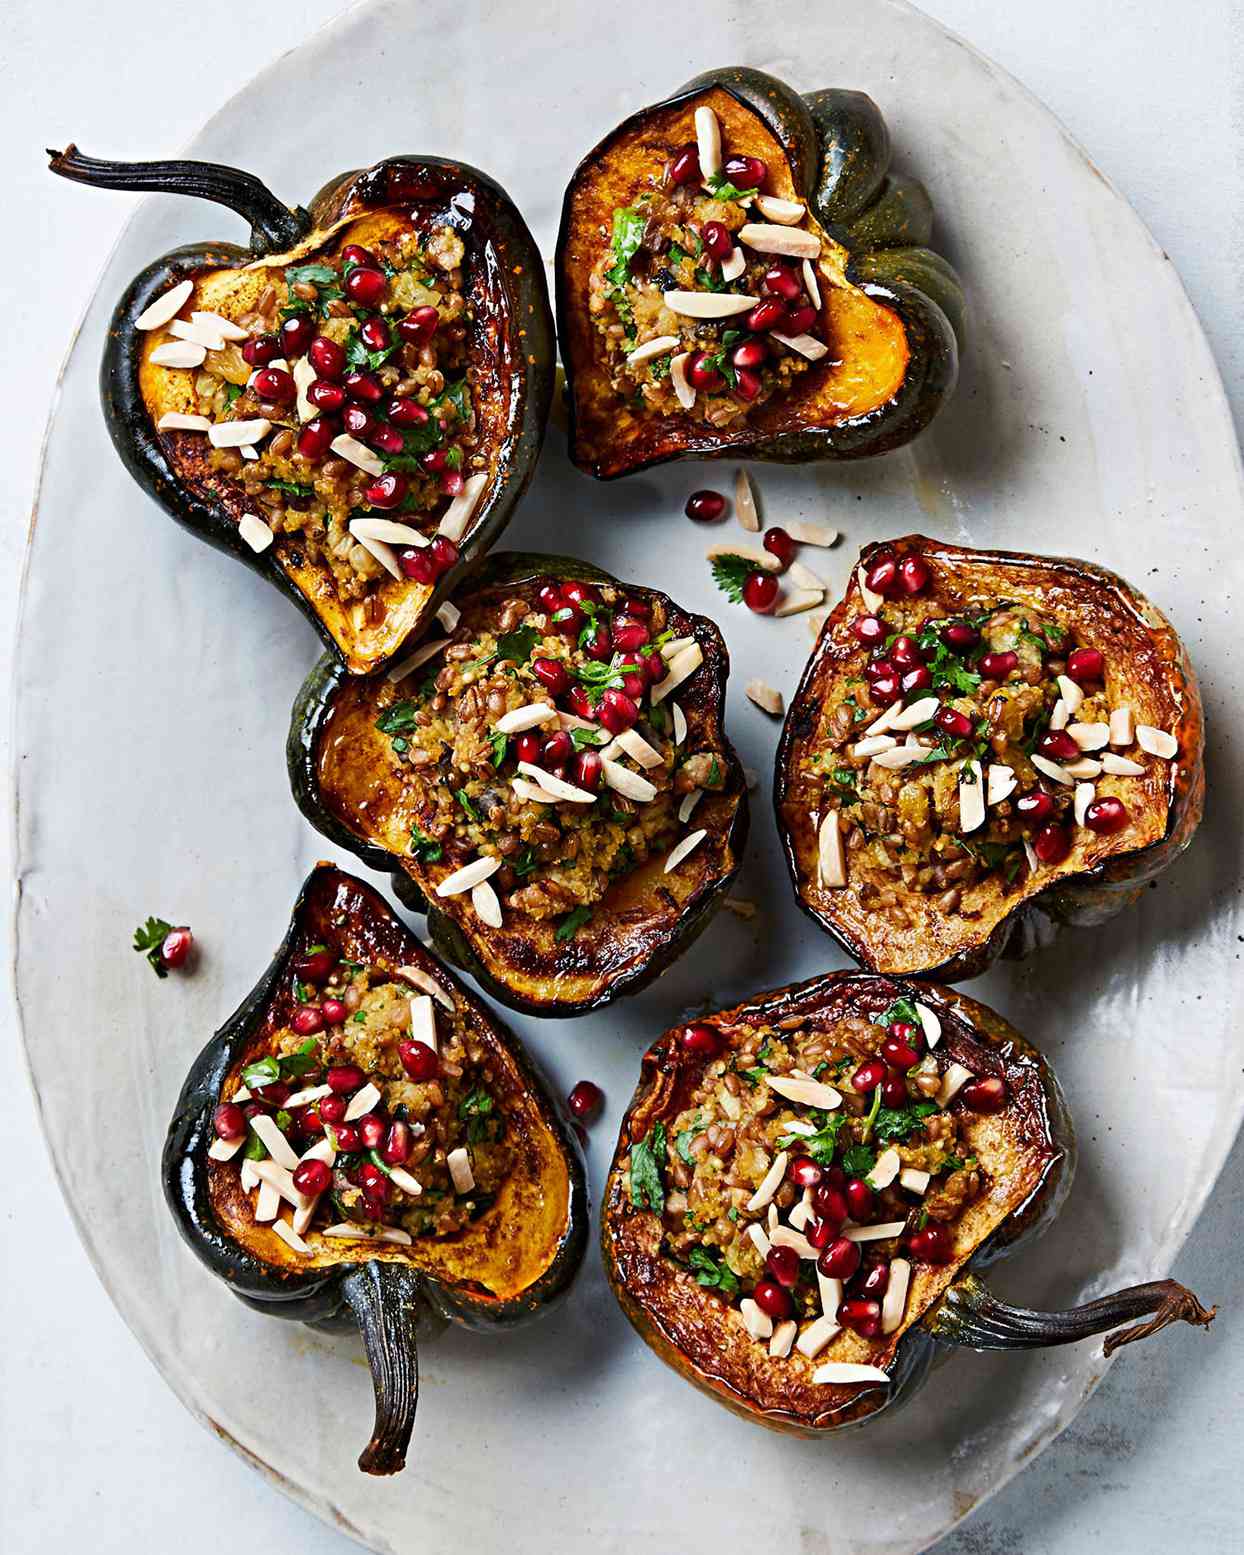 Acorn Squash with Mixed Grain Stuffing